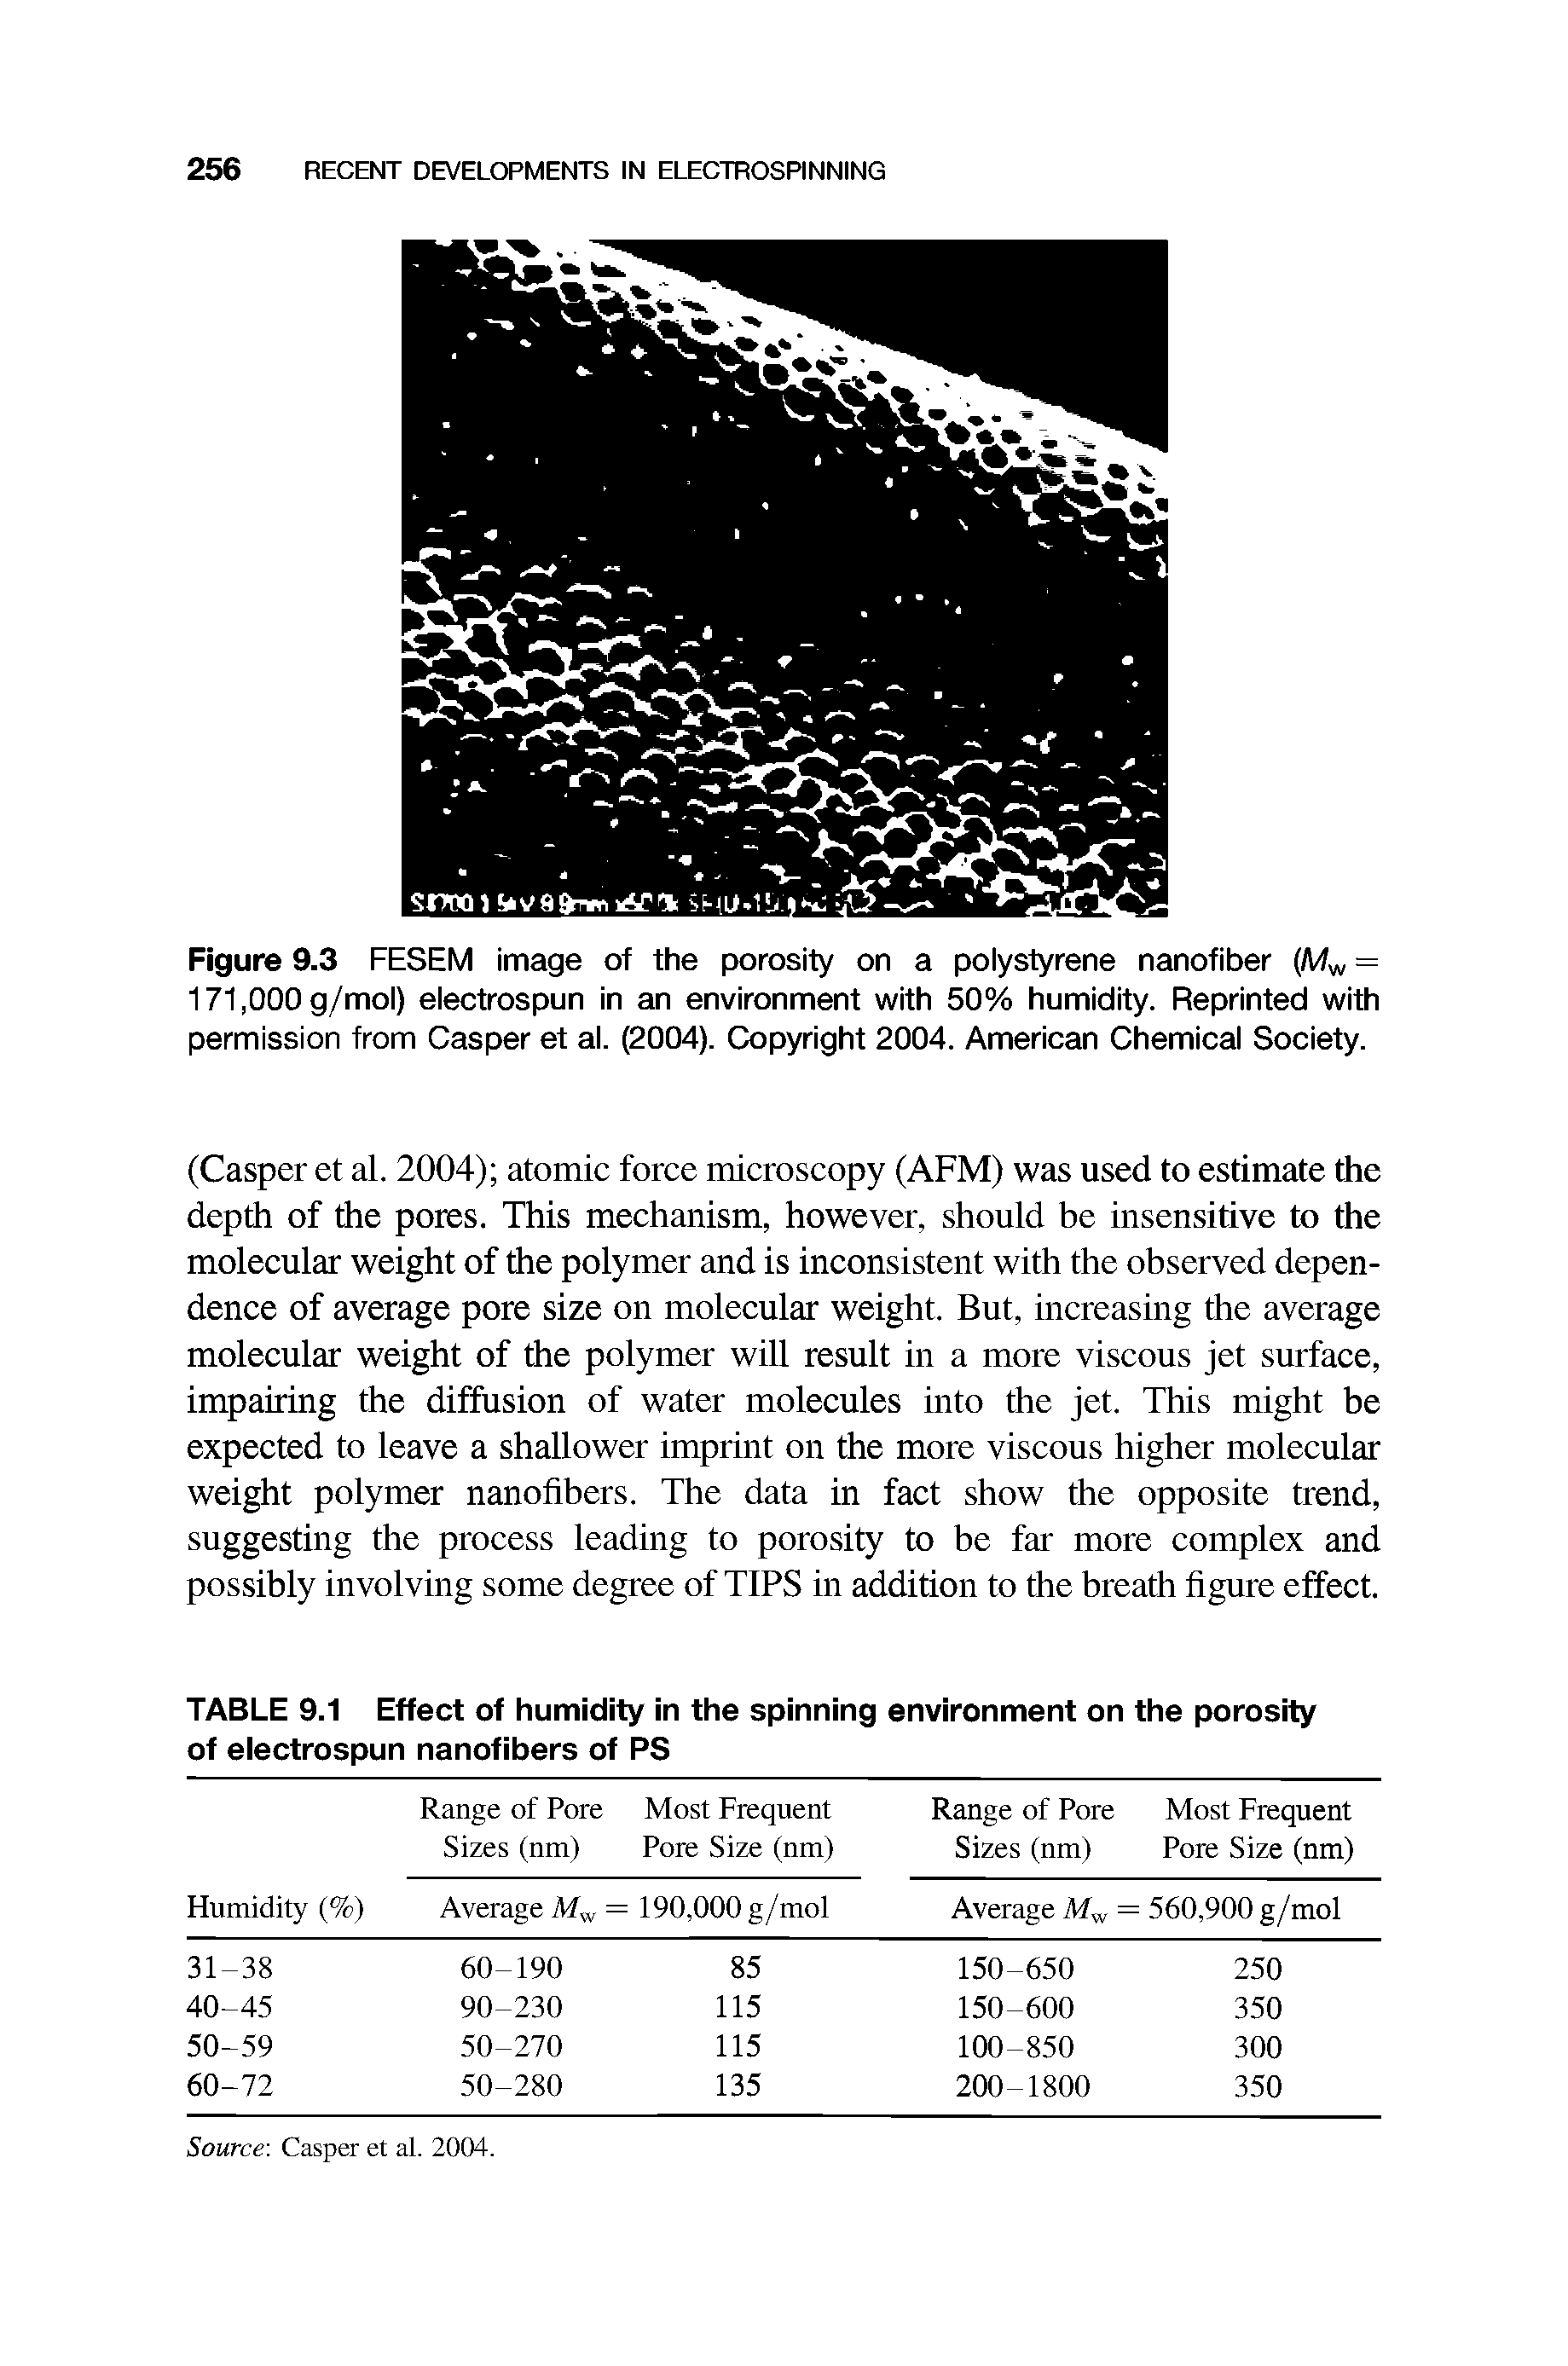 Figure 9.3 FESEM image of the porosity on a polystyrene nanofiber (/Ww = 171,000g/mol) electrospun in an environment with 50% humidity. Reprinted with permission from Casper et al. (2004). Copyright 2004. American Chemical Society.